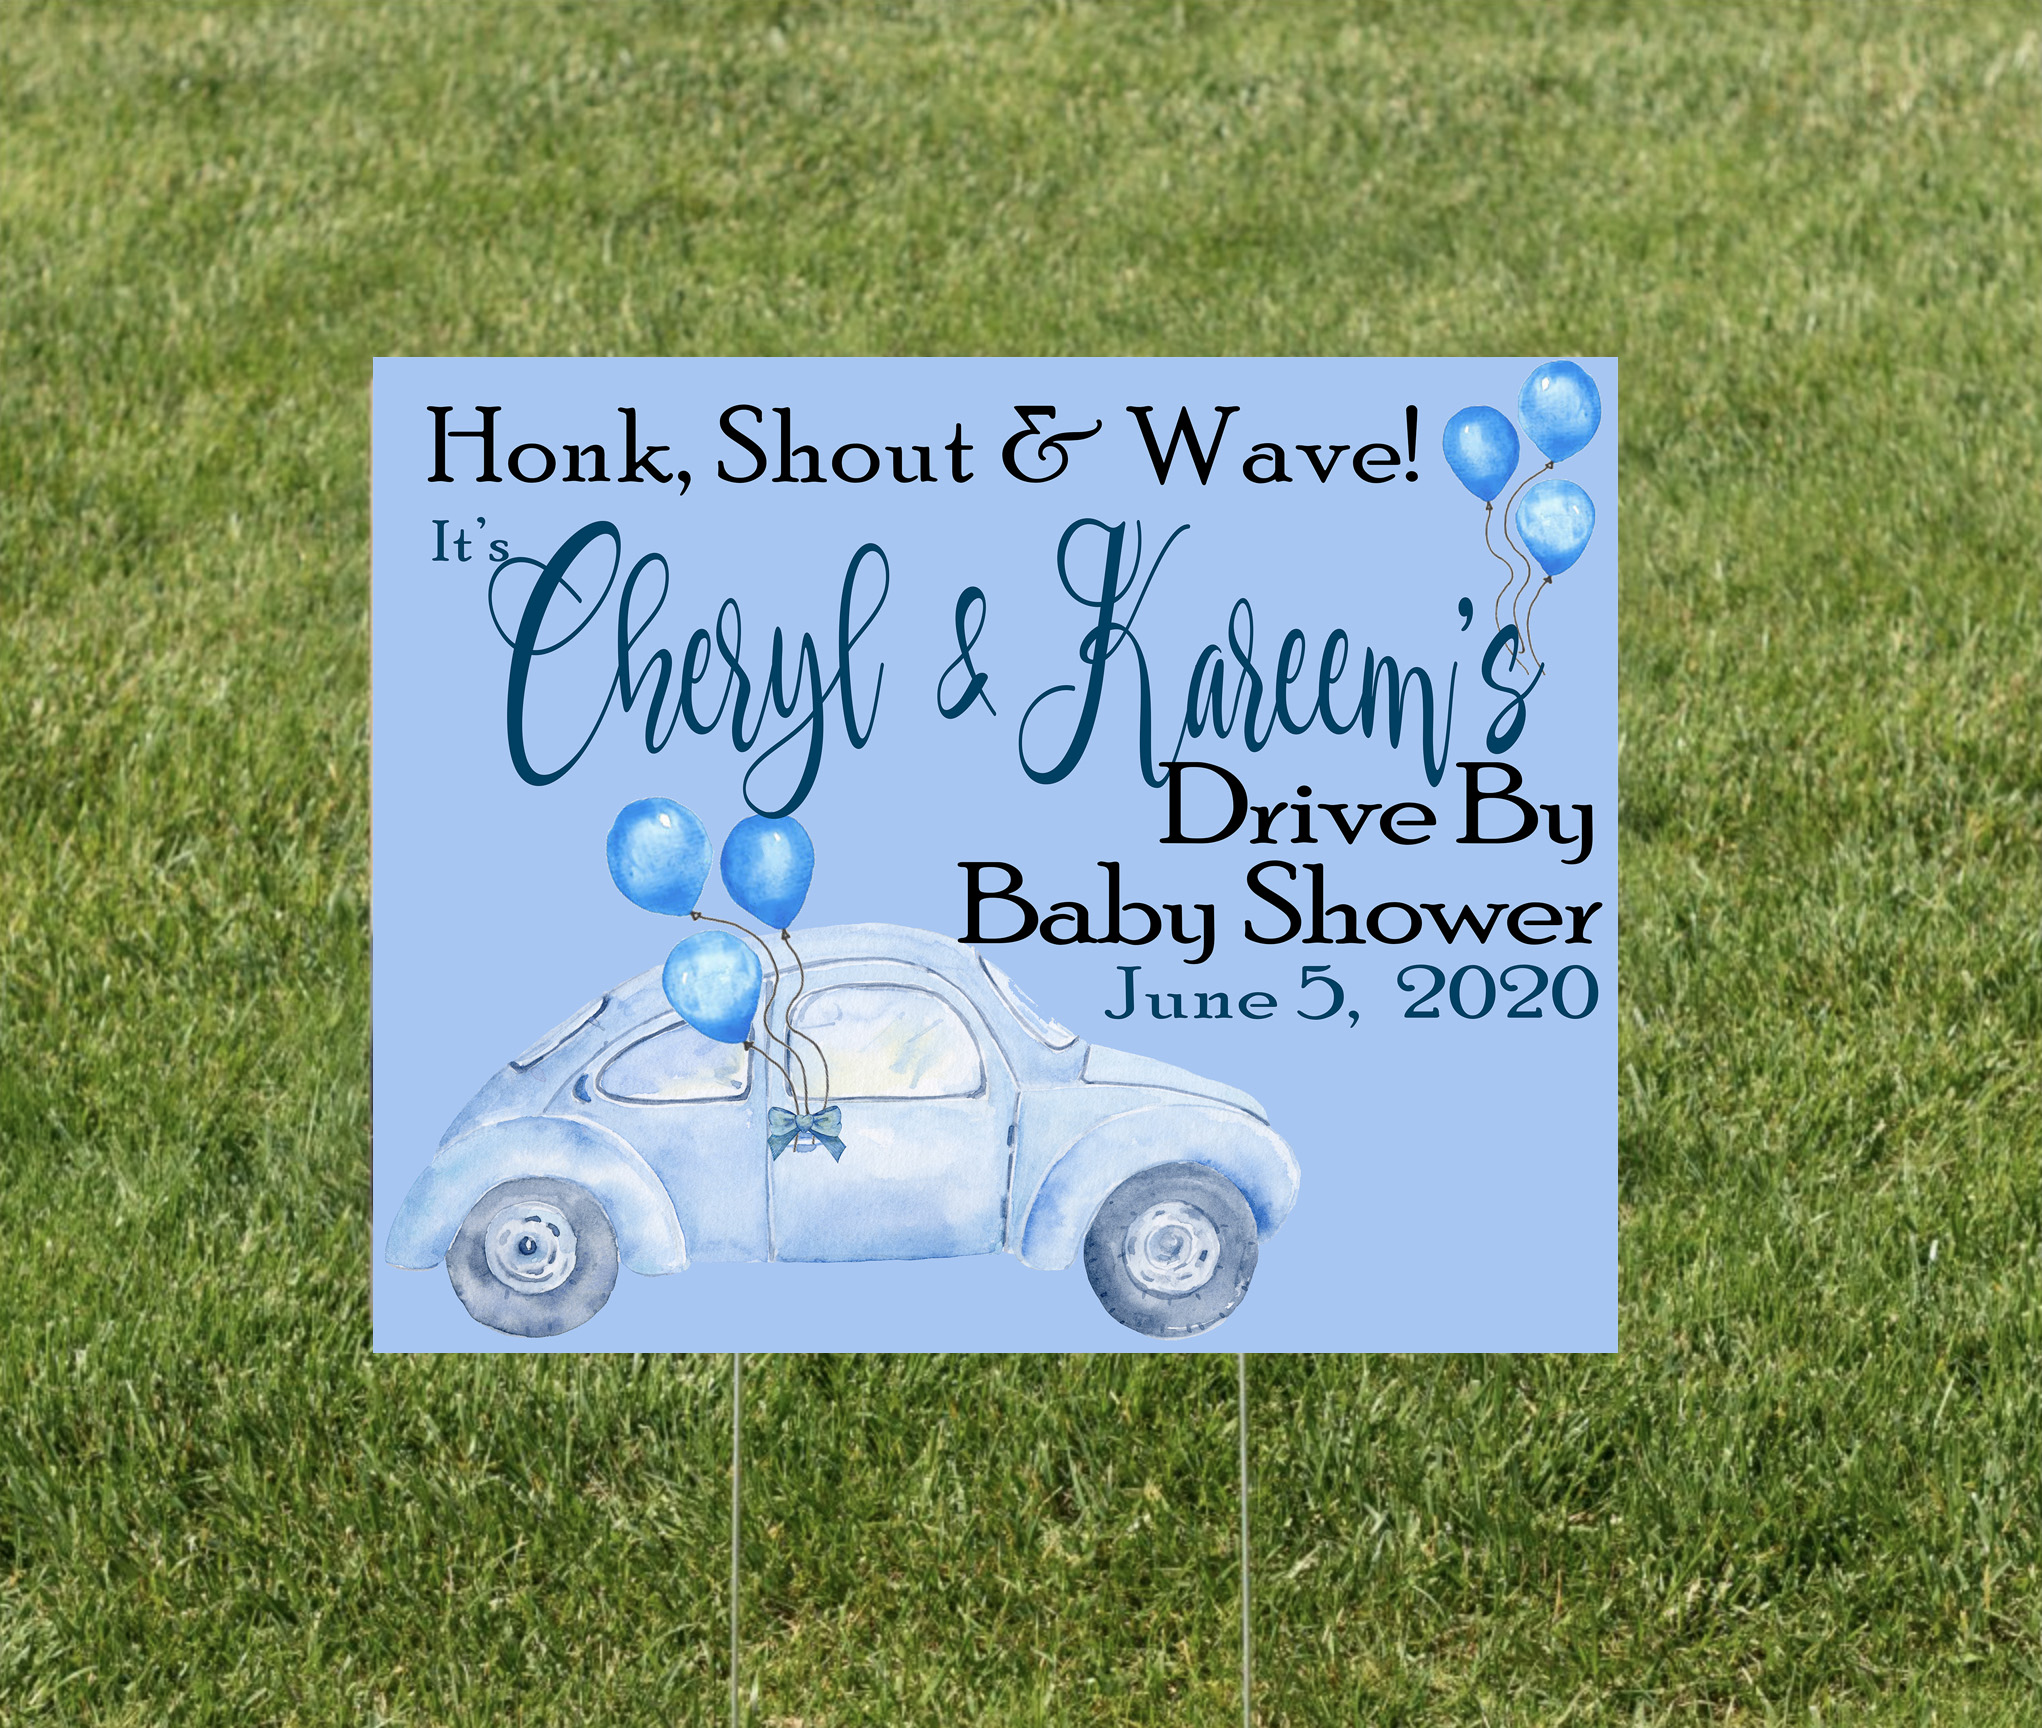 Baby Shower Yard Sign made at The Brat Shack Party Store, NY